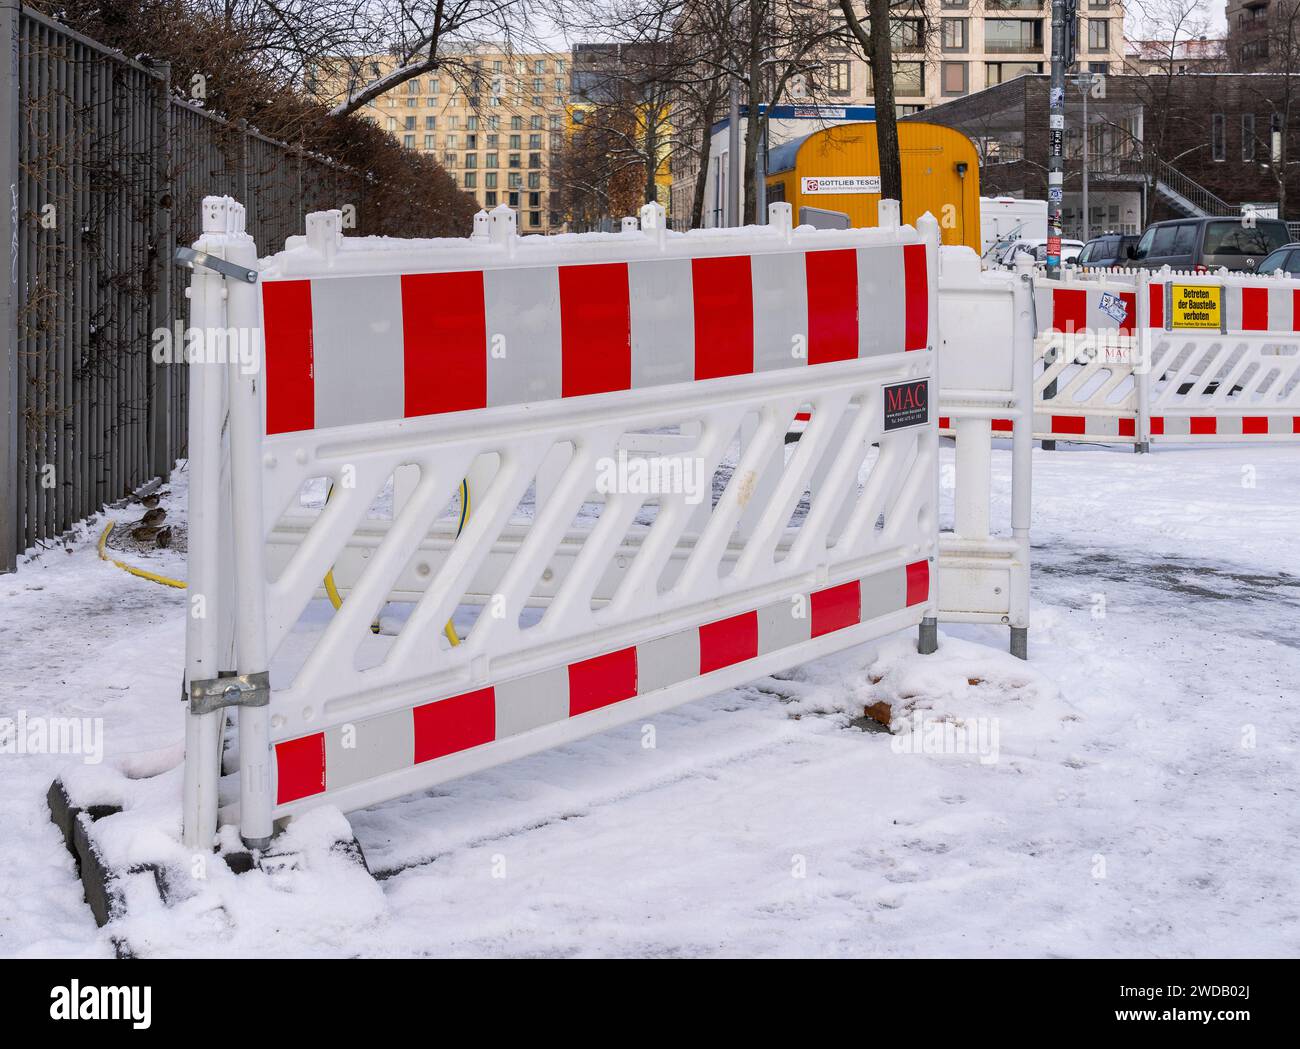 Warnings At A Construction Site, Winter With Snow, Berlin, Germany Stock Photo